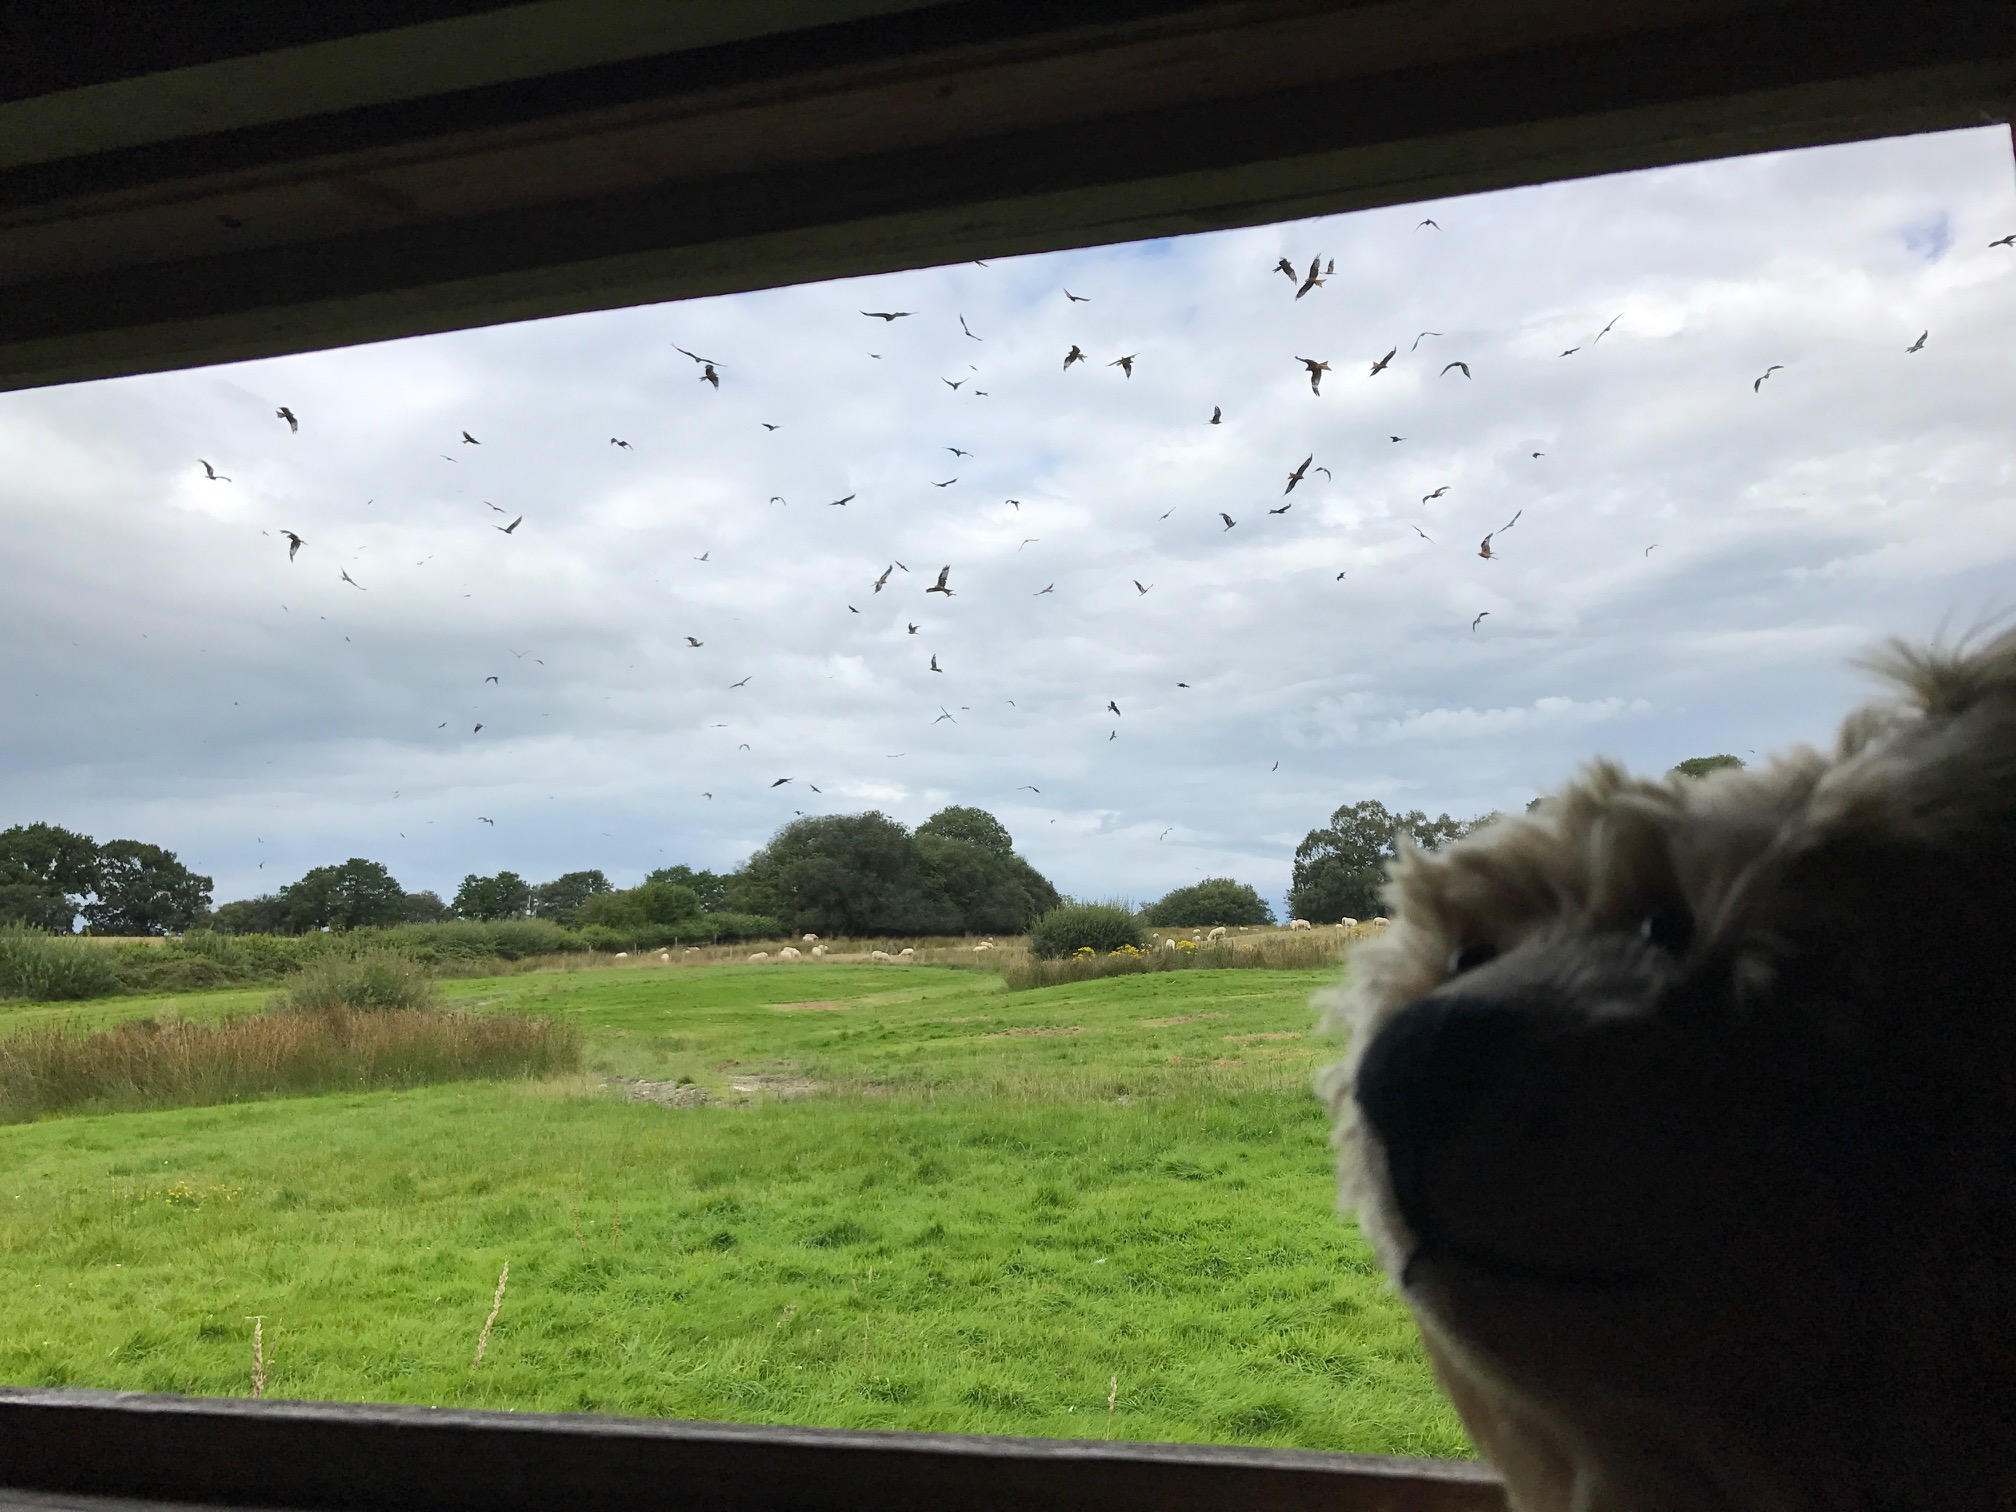 Gigrin Farm: Watching the many Red Kites from the hide.